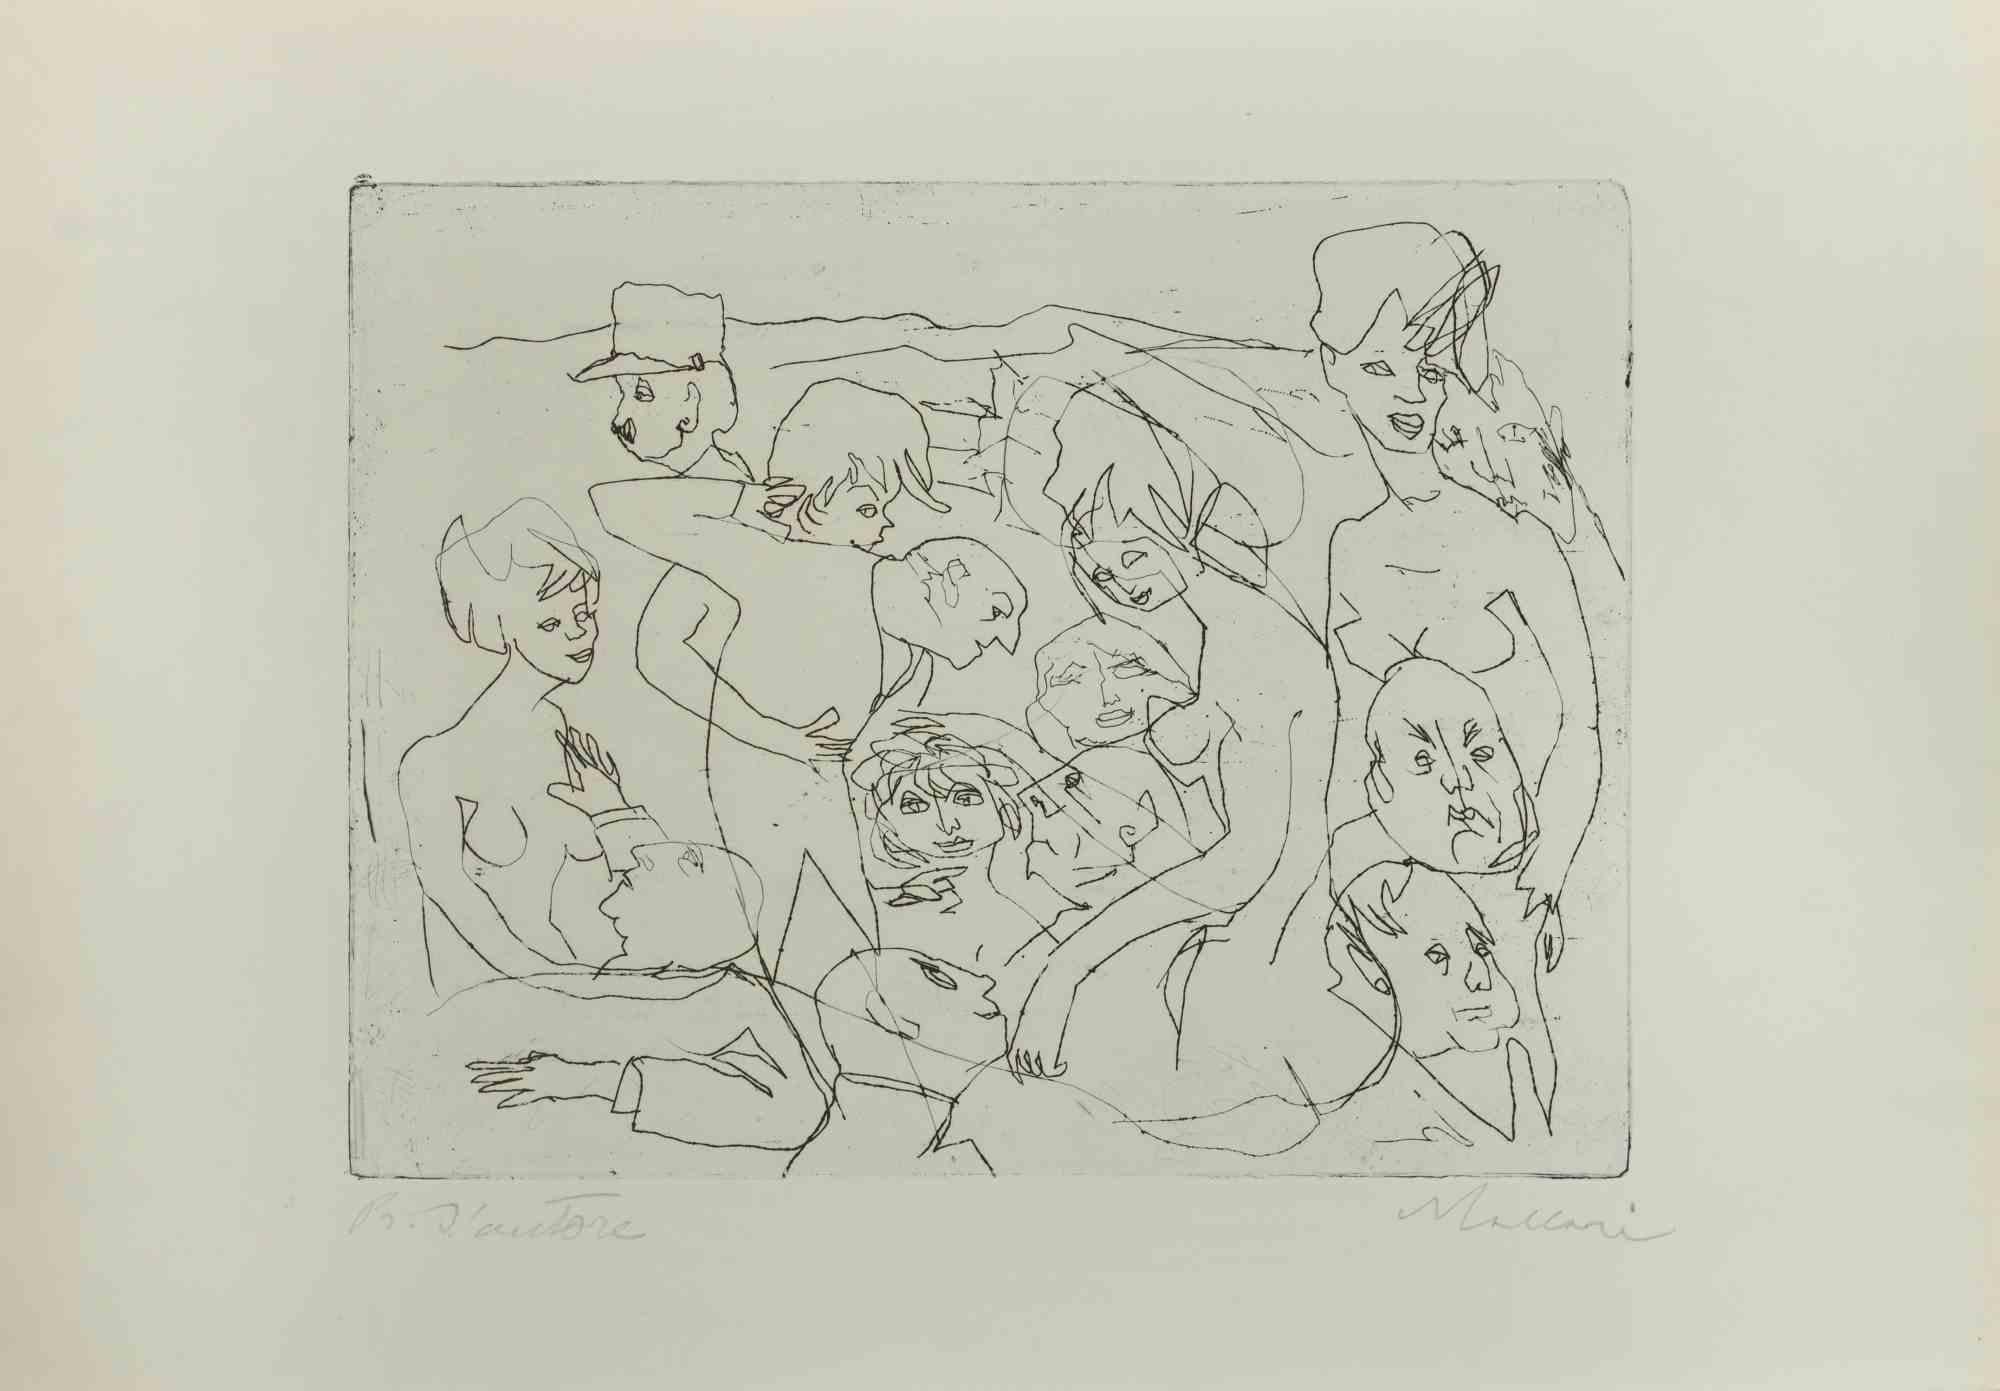 Figures is an Etching  realized by Mino Maccari in the 1940s.

Hand-signed in the lower right part.

Artist's Proof.

Good conditions.

Mino Maccari (Siena, 1924-Rome, June 16, 1989) was an Italian writer, painter, engraver and journalist, winner of